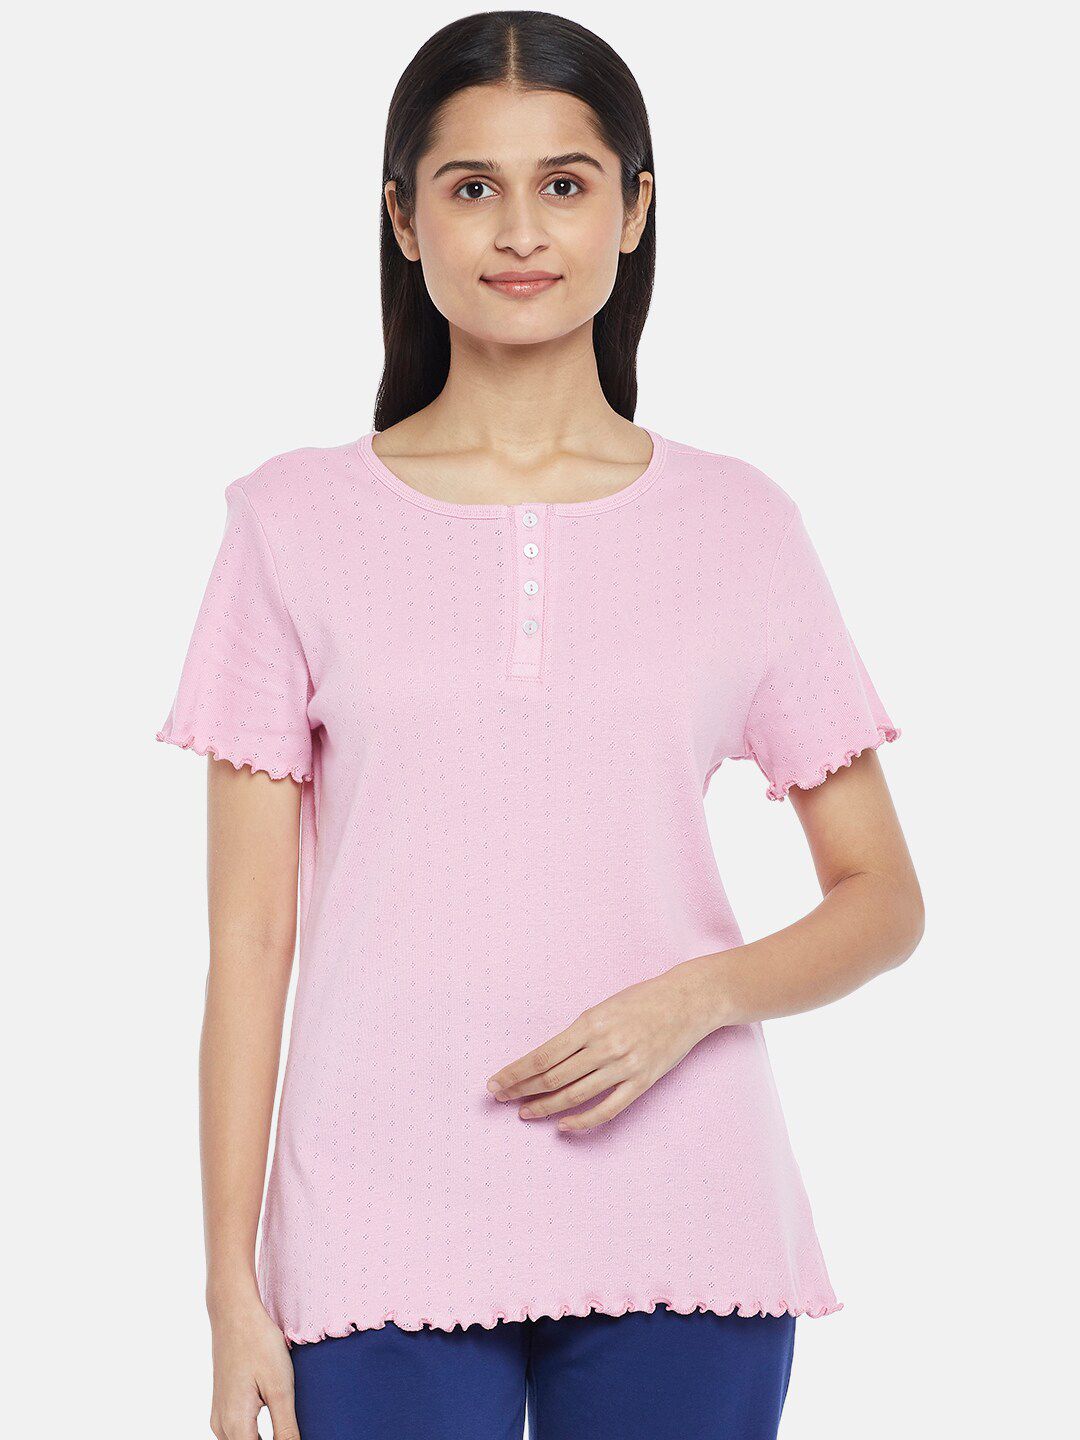 Dreamz by Pantaloons Pink Solid Pure Cotton Lounge Top Price in India